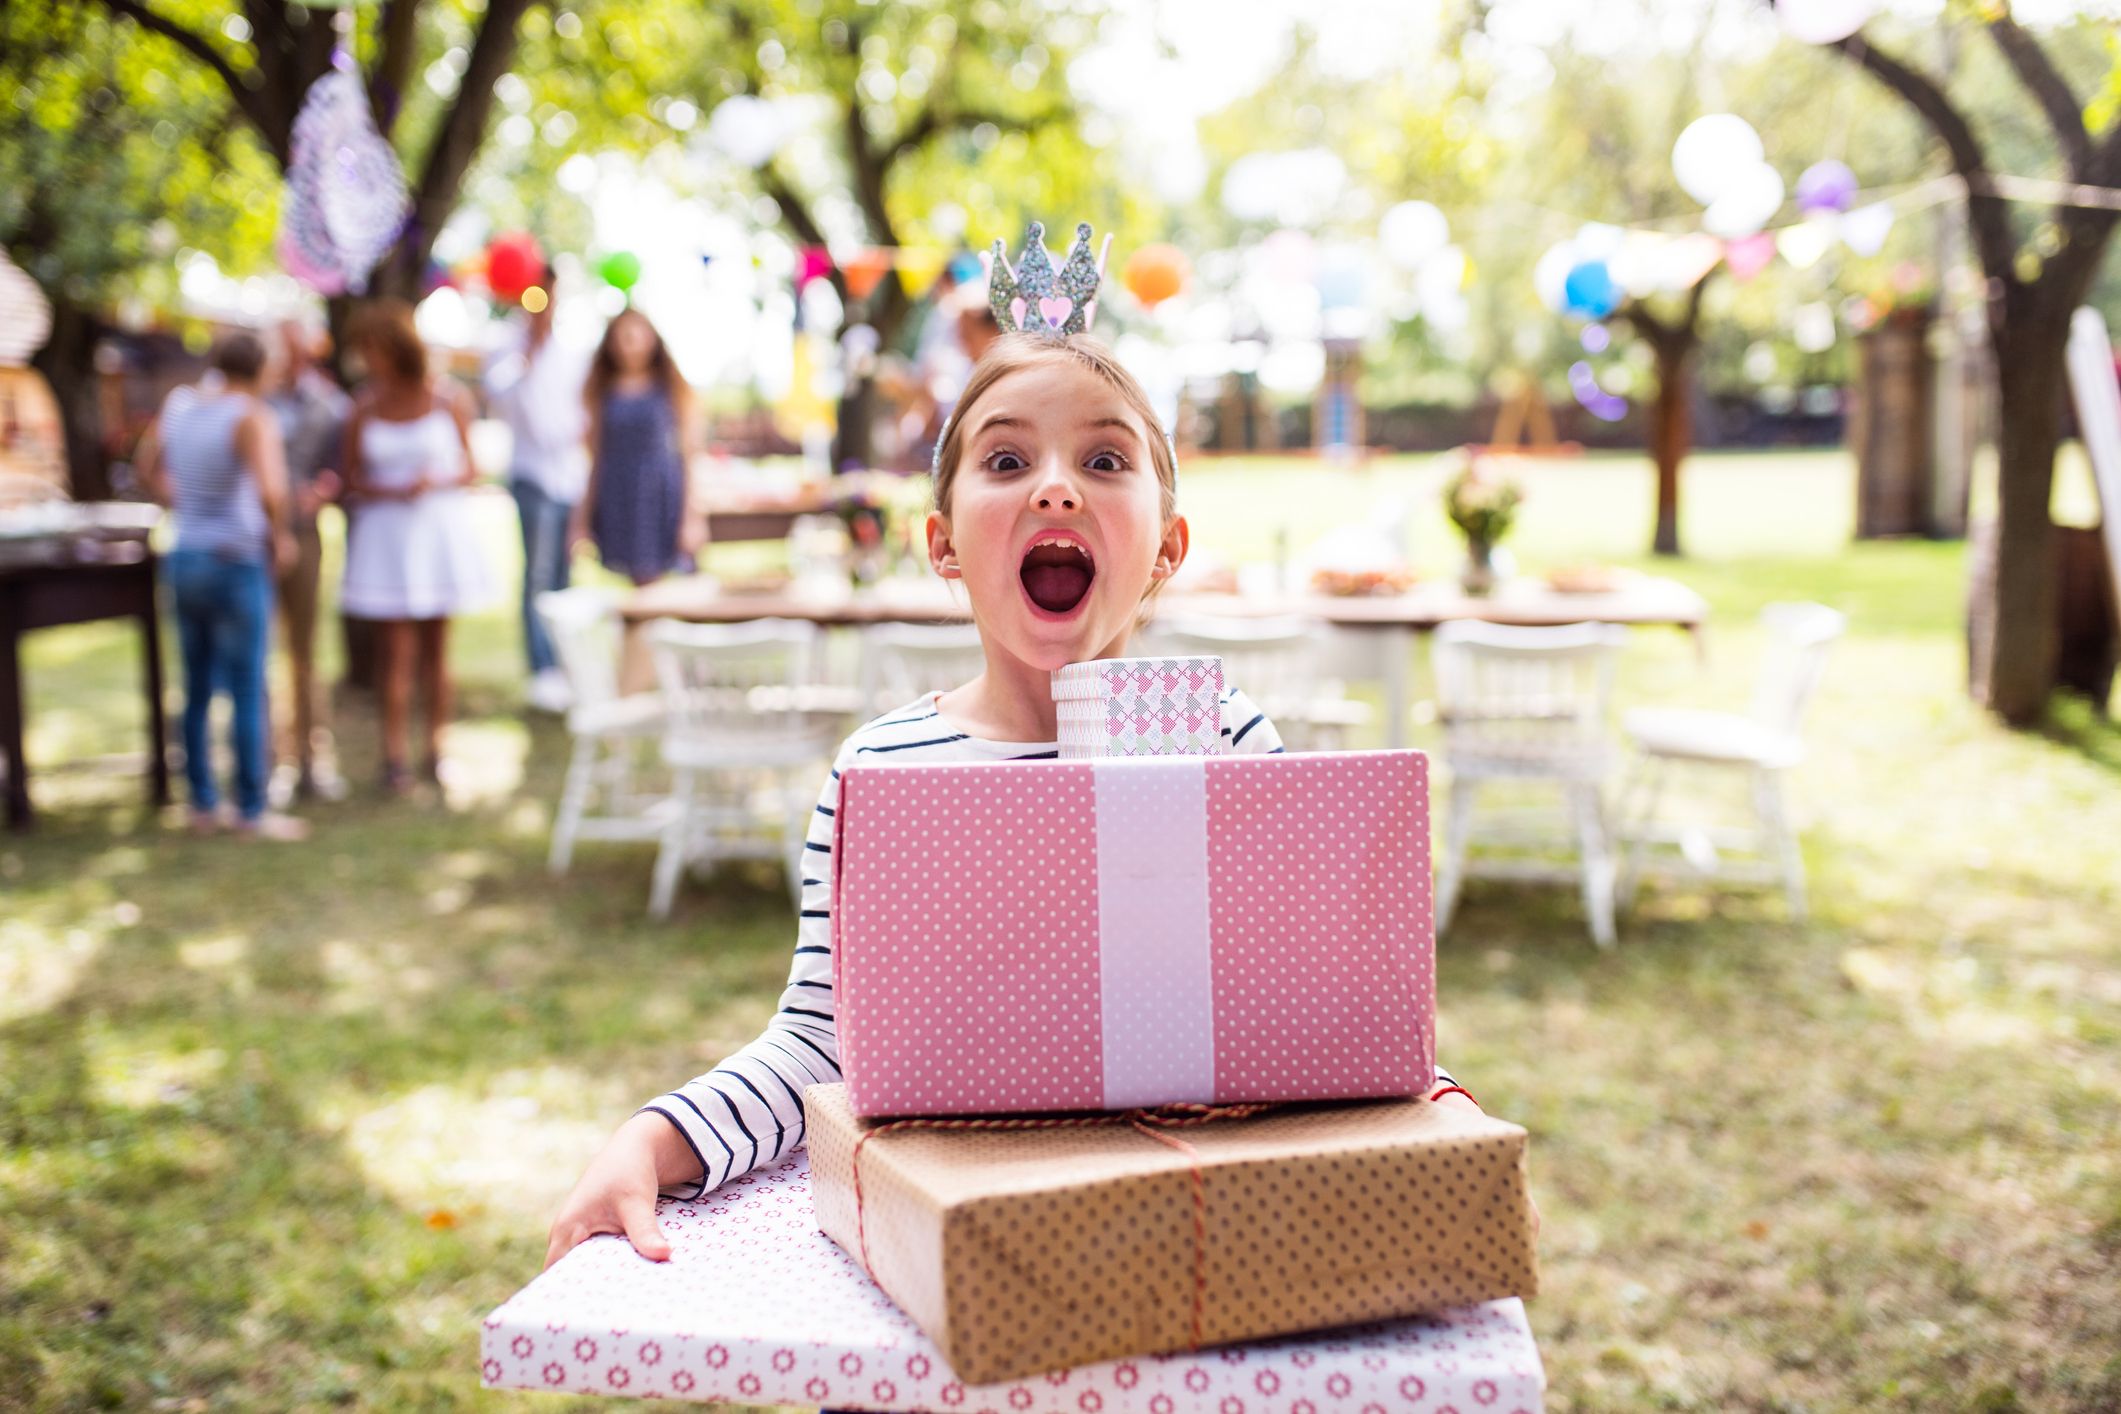 Park Birthday Party Ideas: 10 Exciting Themes for a Memorable Celebration